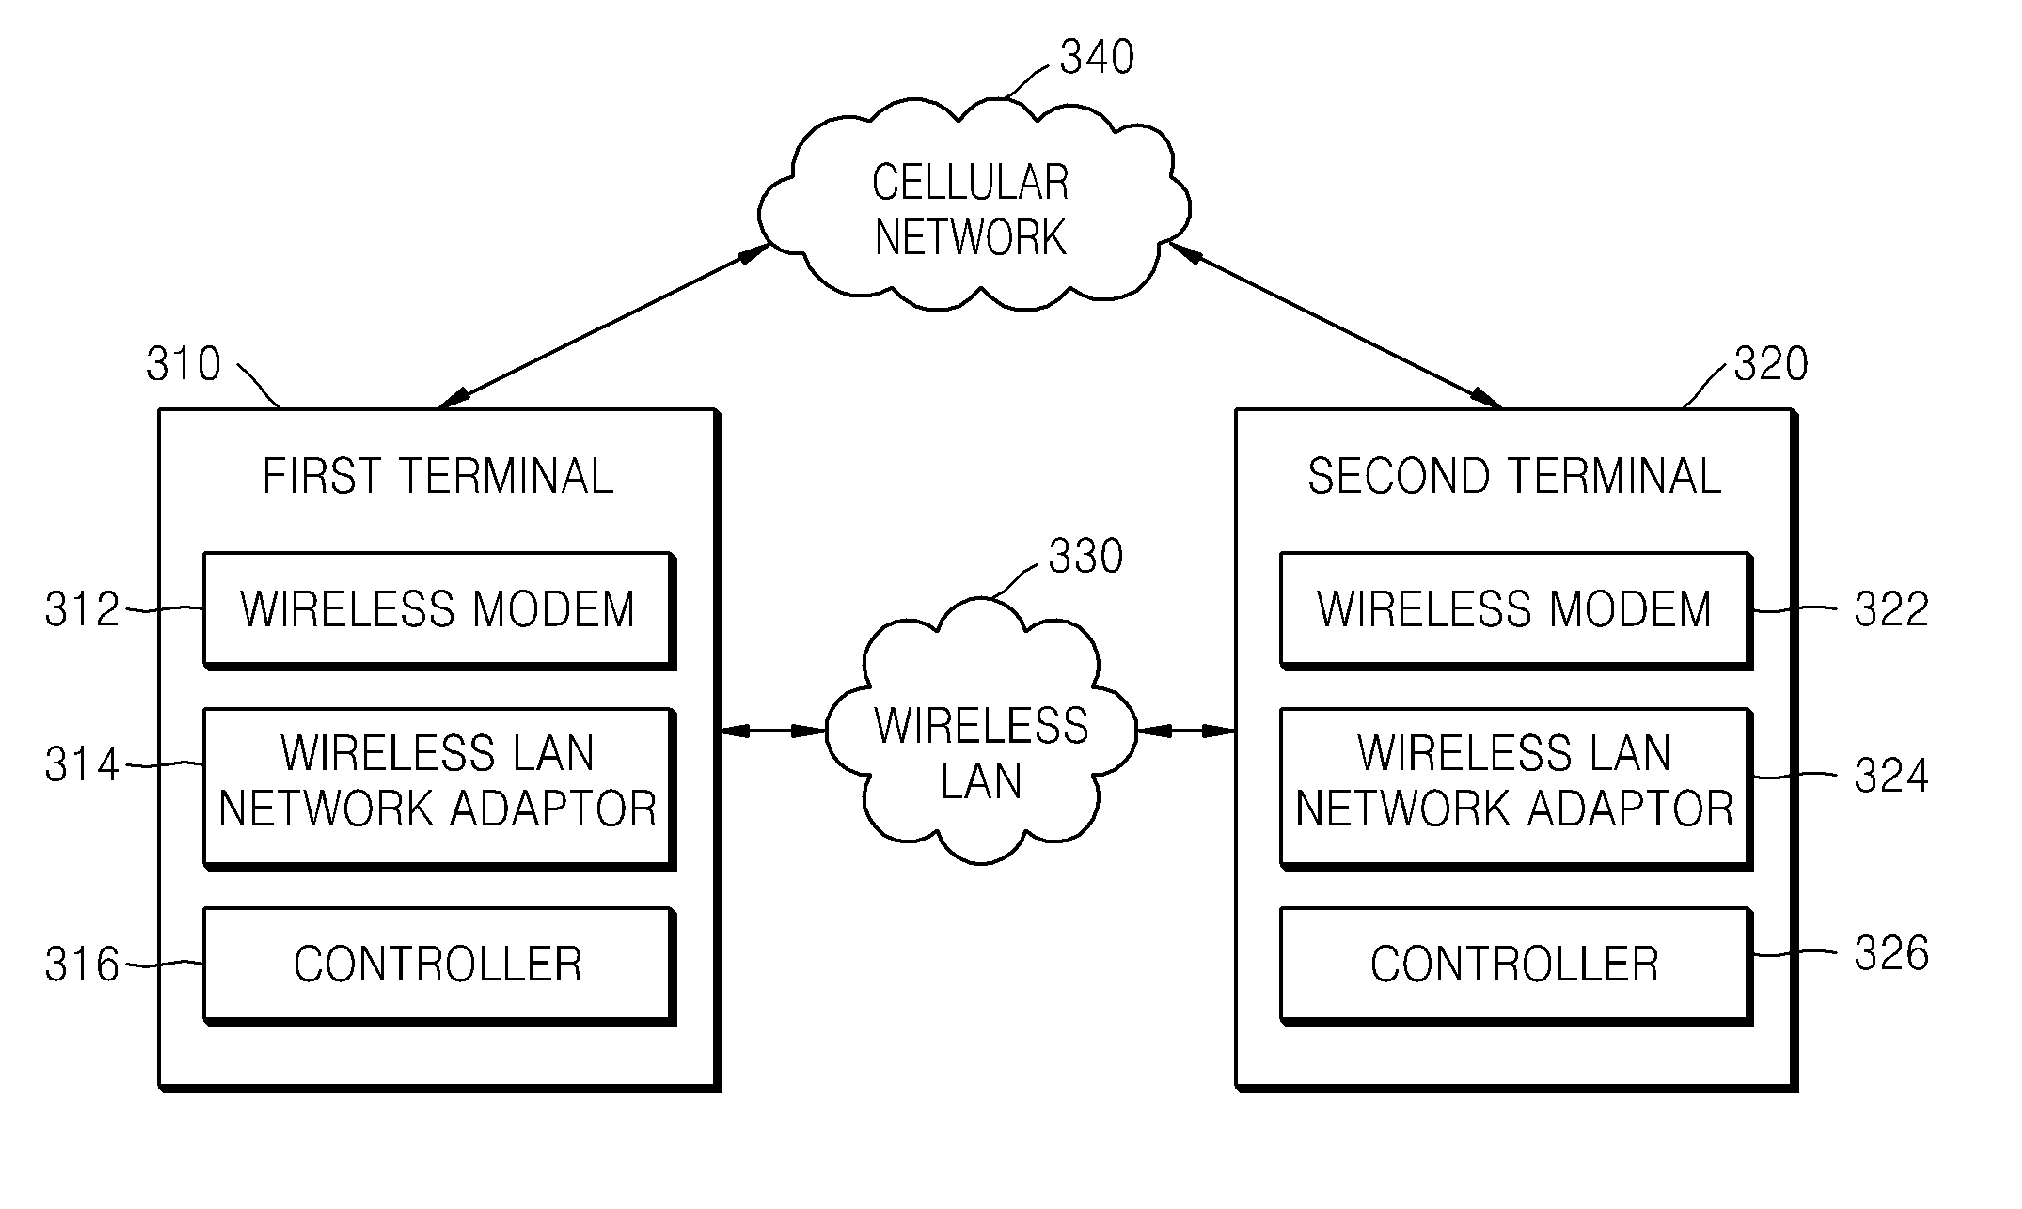 Method and apparatus for sharing wireless data service